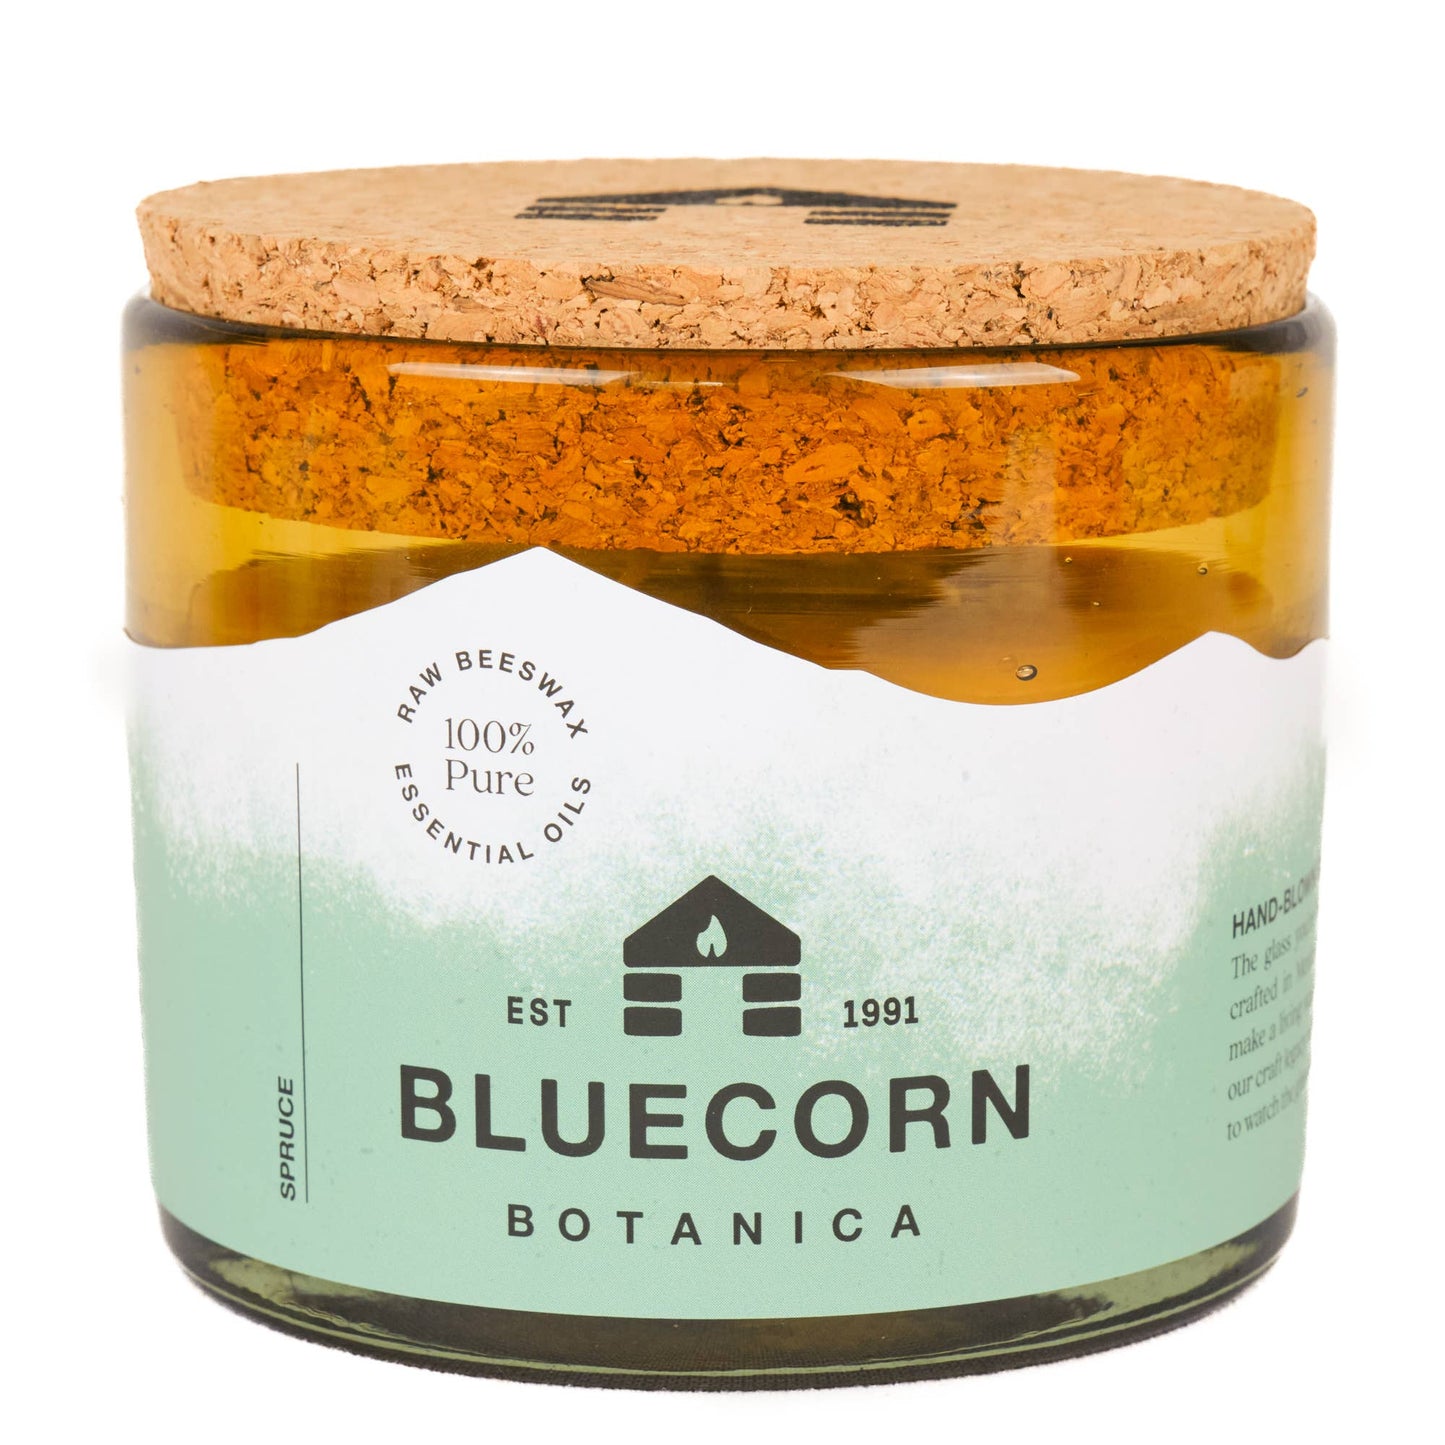 NEW Beeswax Botanica Candle in Blown Glass: Spruce / 8 oz